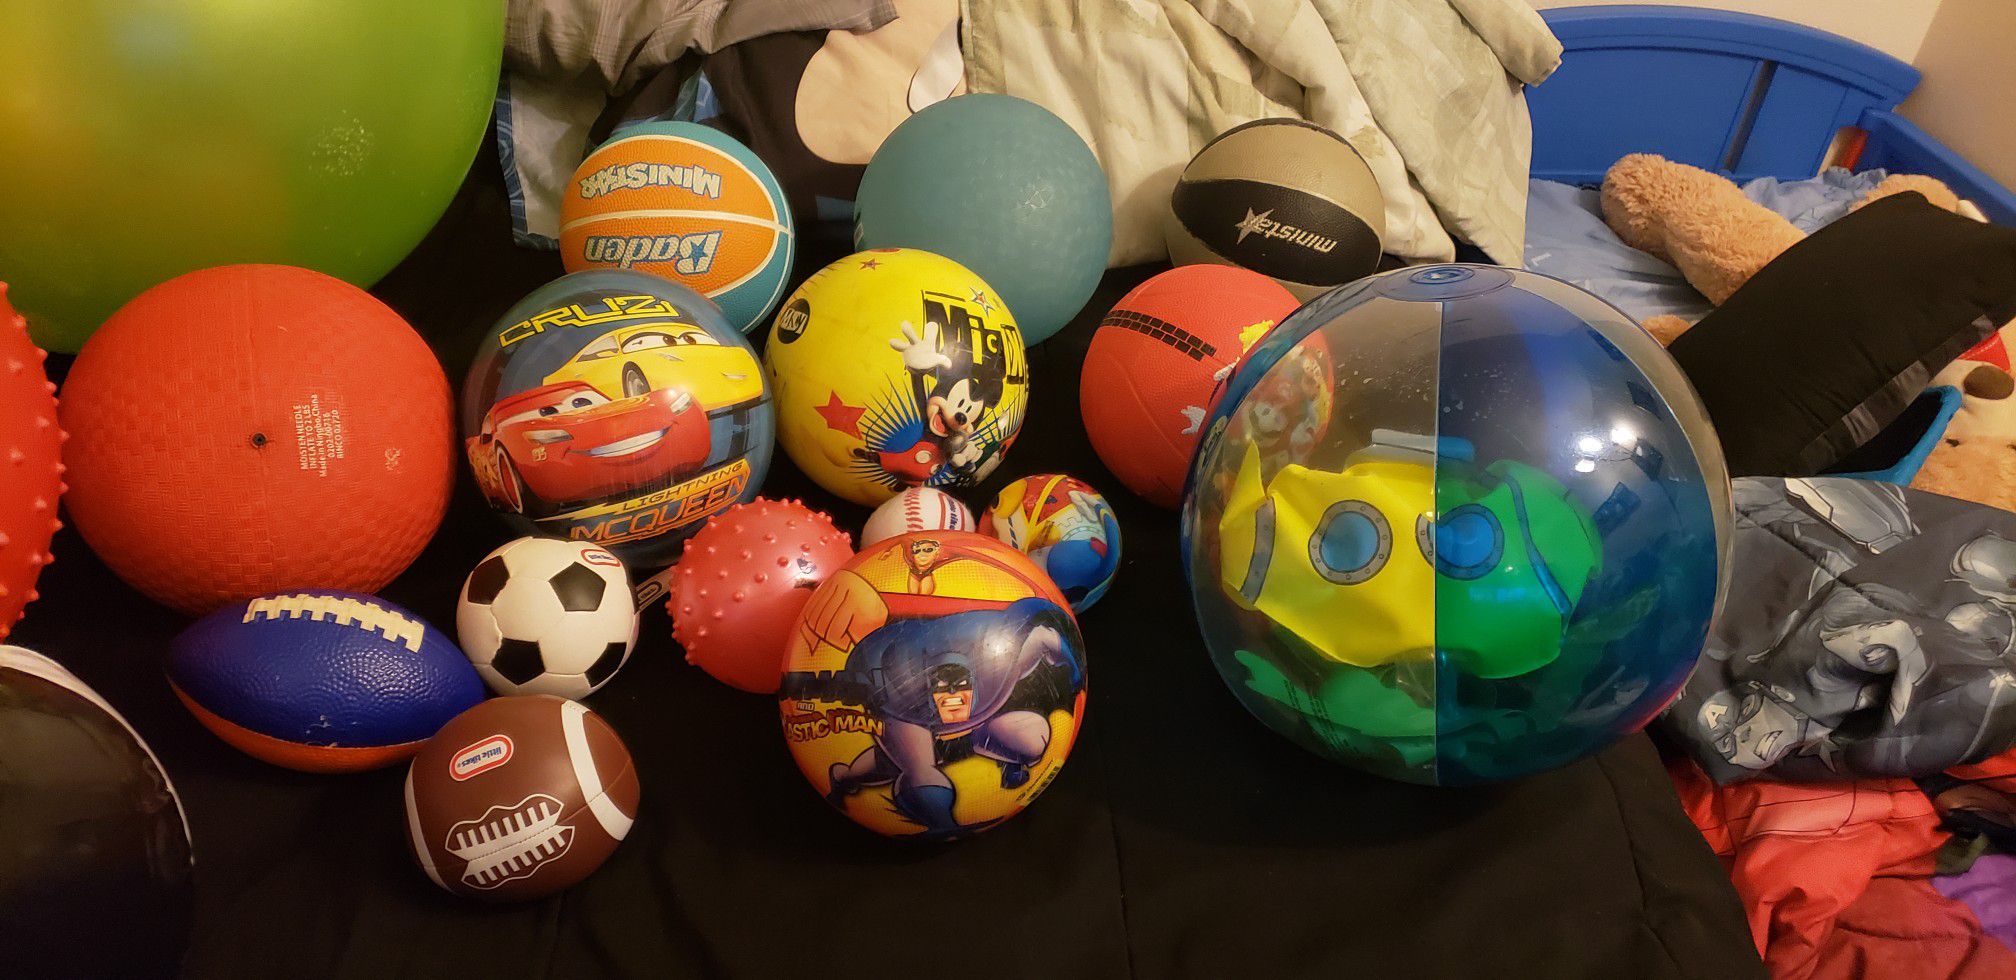 Balls $10 for all or $1 each..